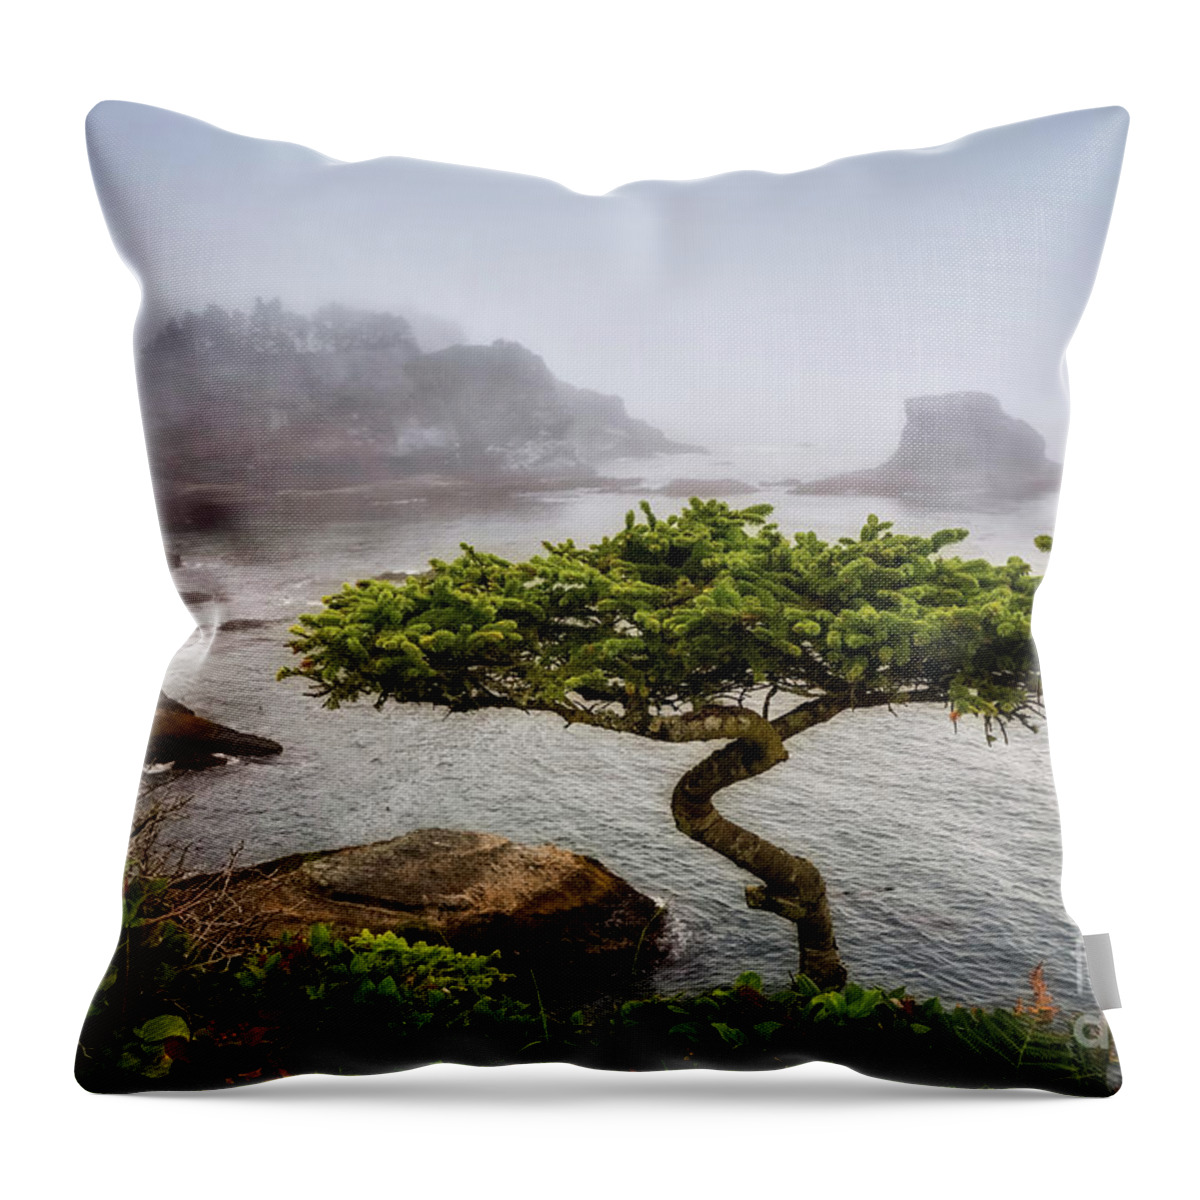 Bonsai Throw Pillow featuring the photograph Another Bonsai by Carrie Cole